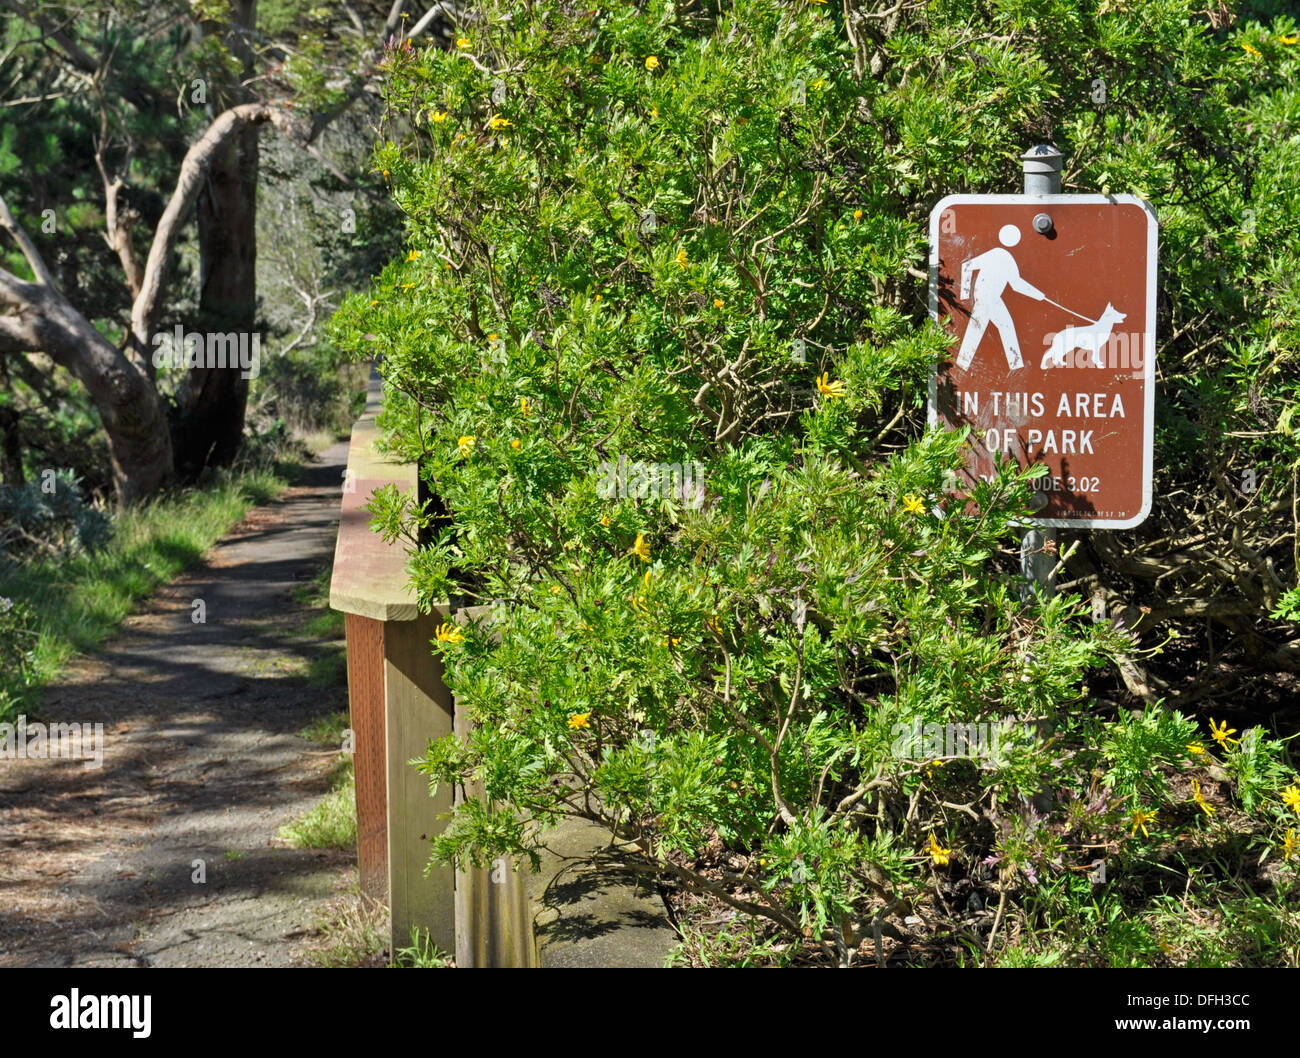 Dogs on leash symbol Sign in park Stock Photo